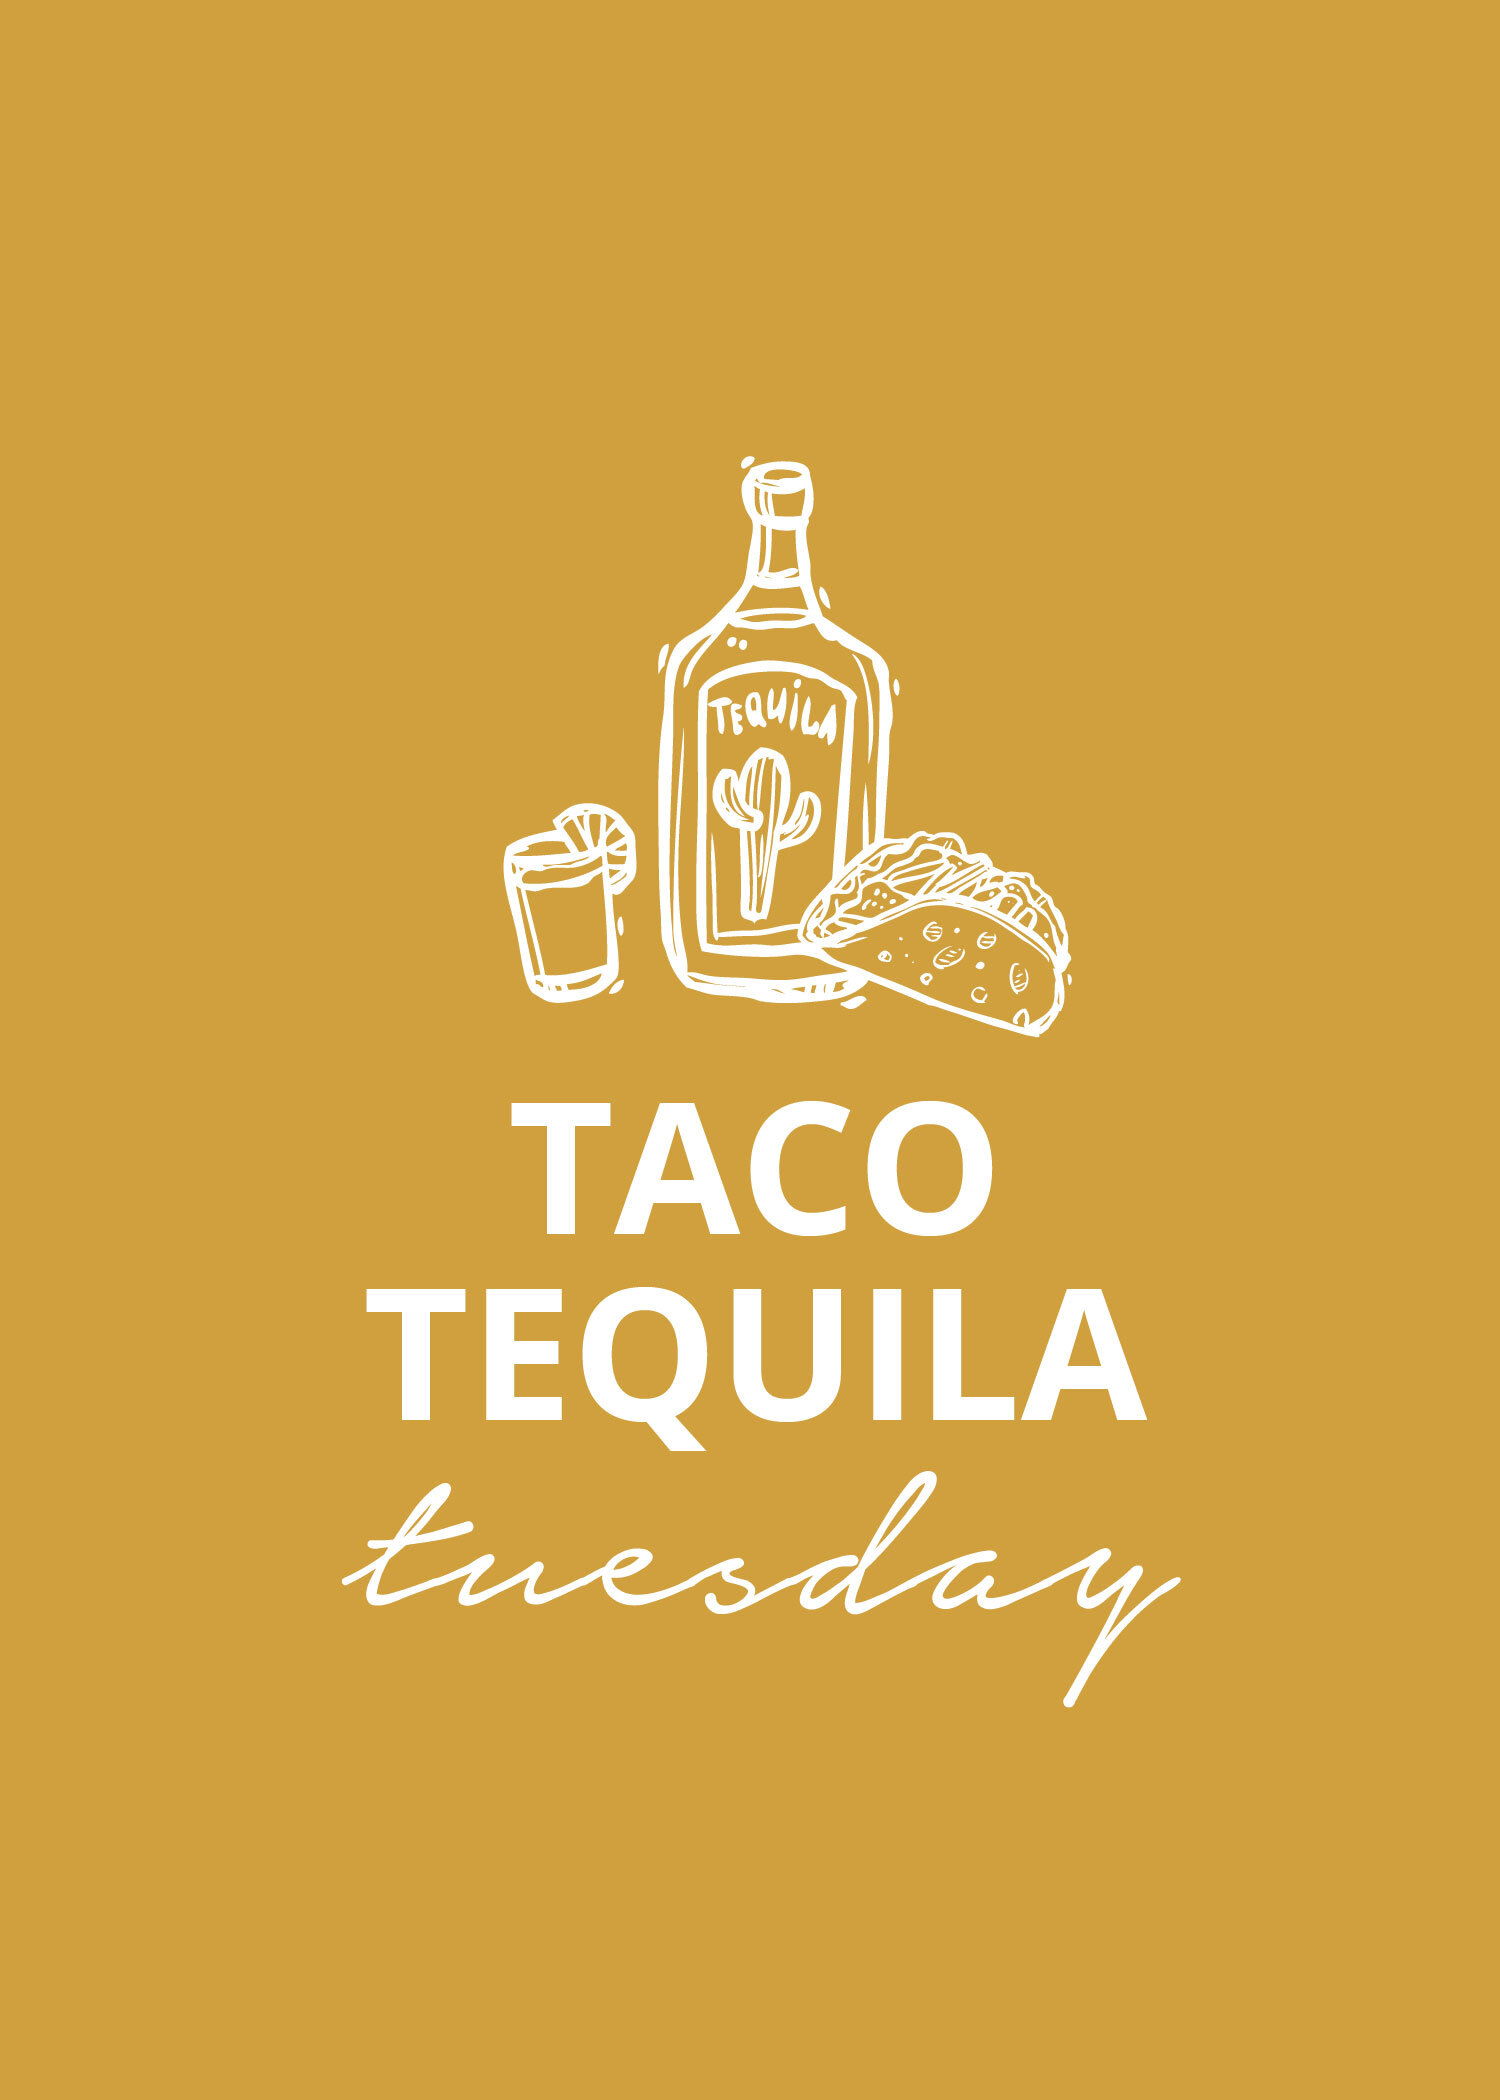 Taco Tequila Tuesday